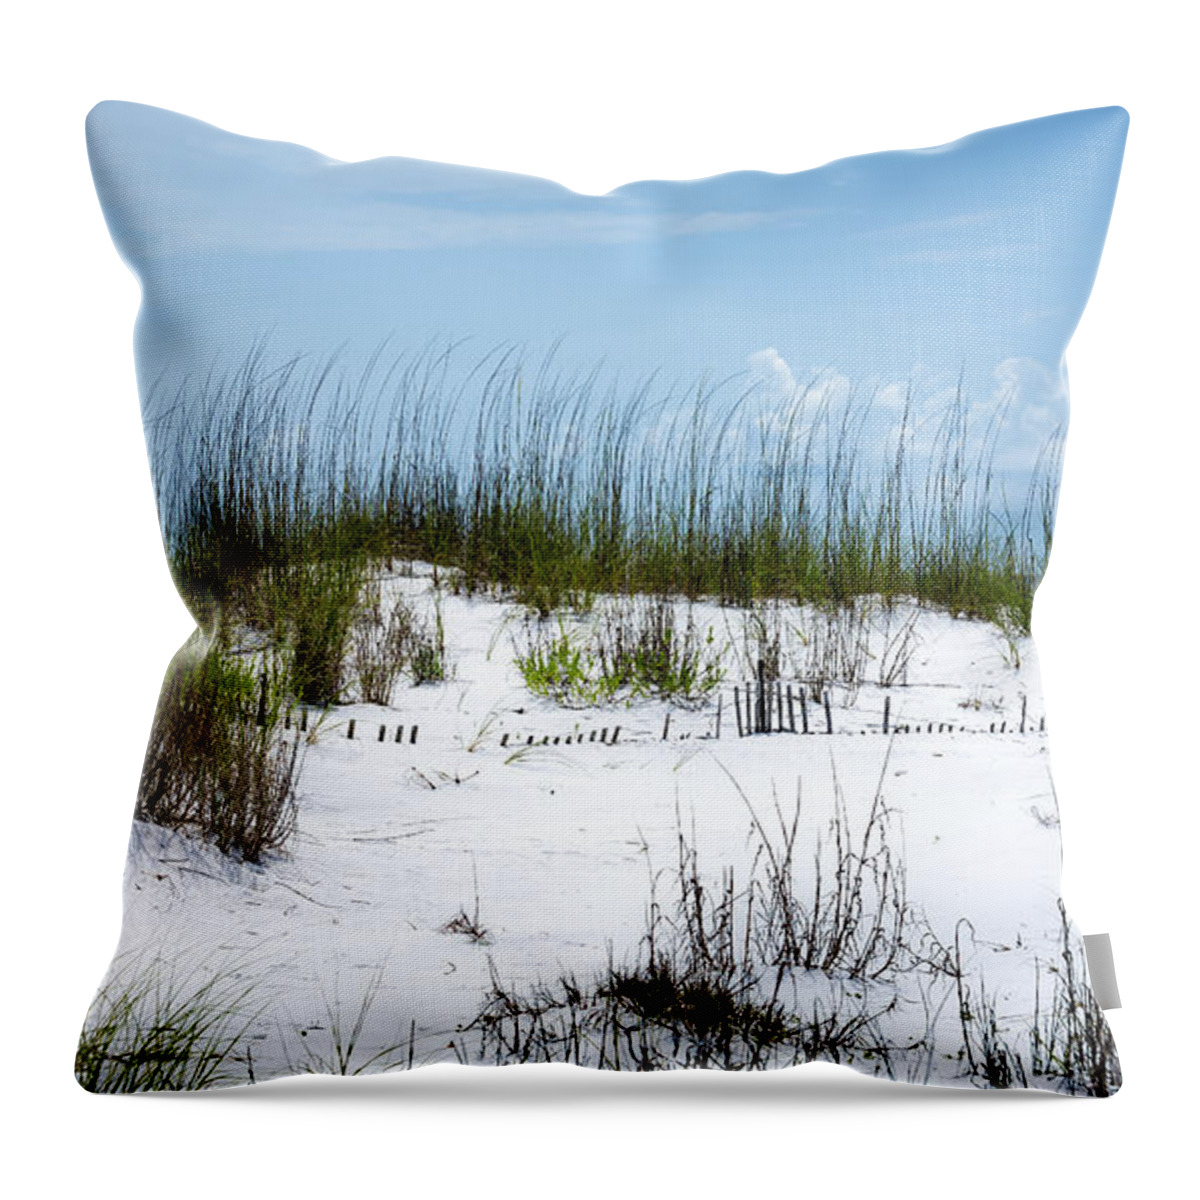 Beach Throw Pillow featuring the photograph Seaside Fenceline by David Morefield